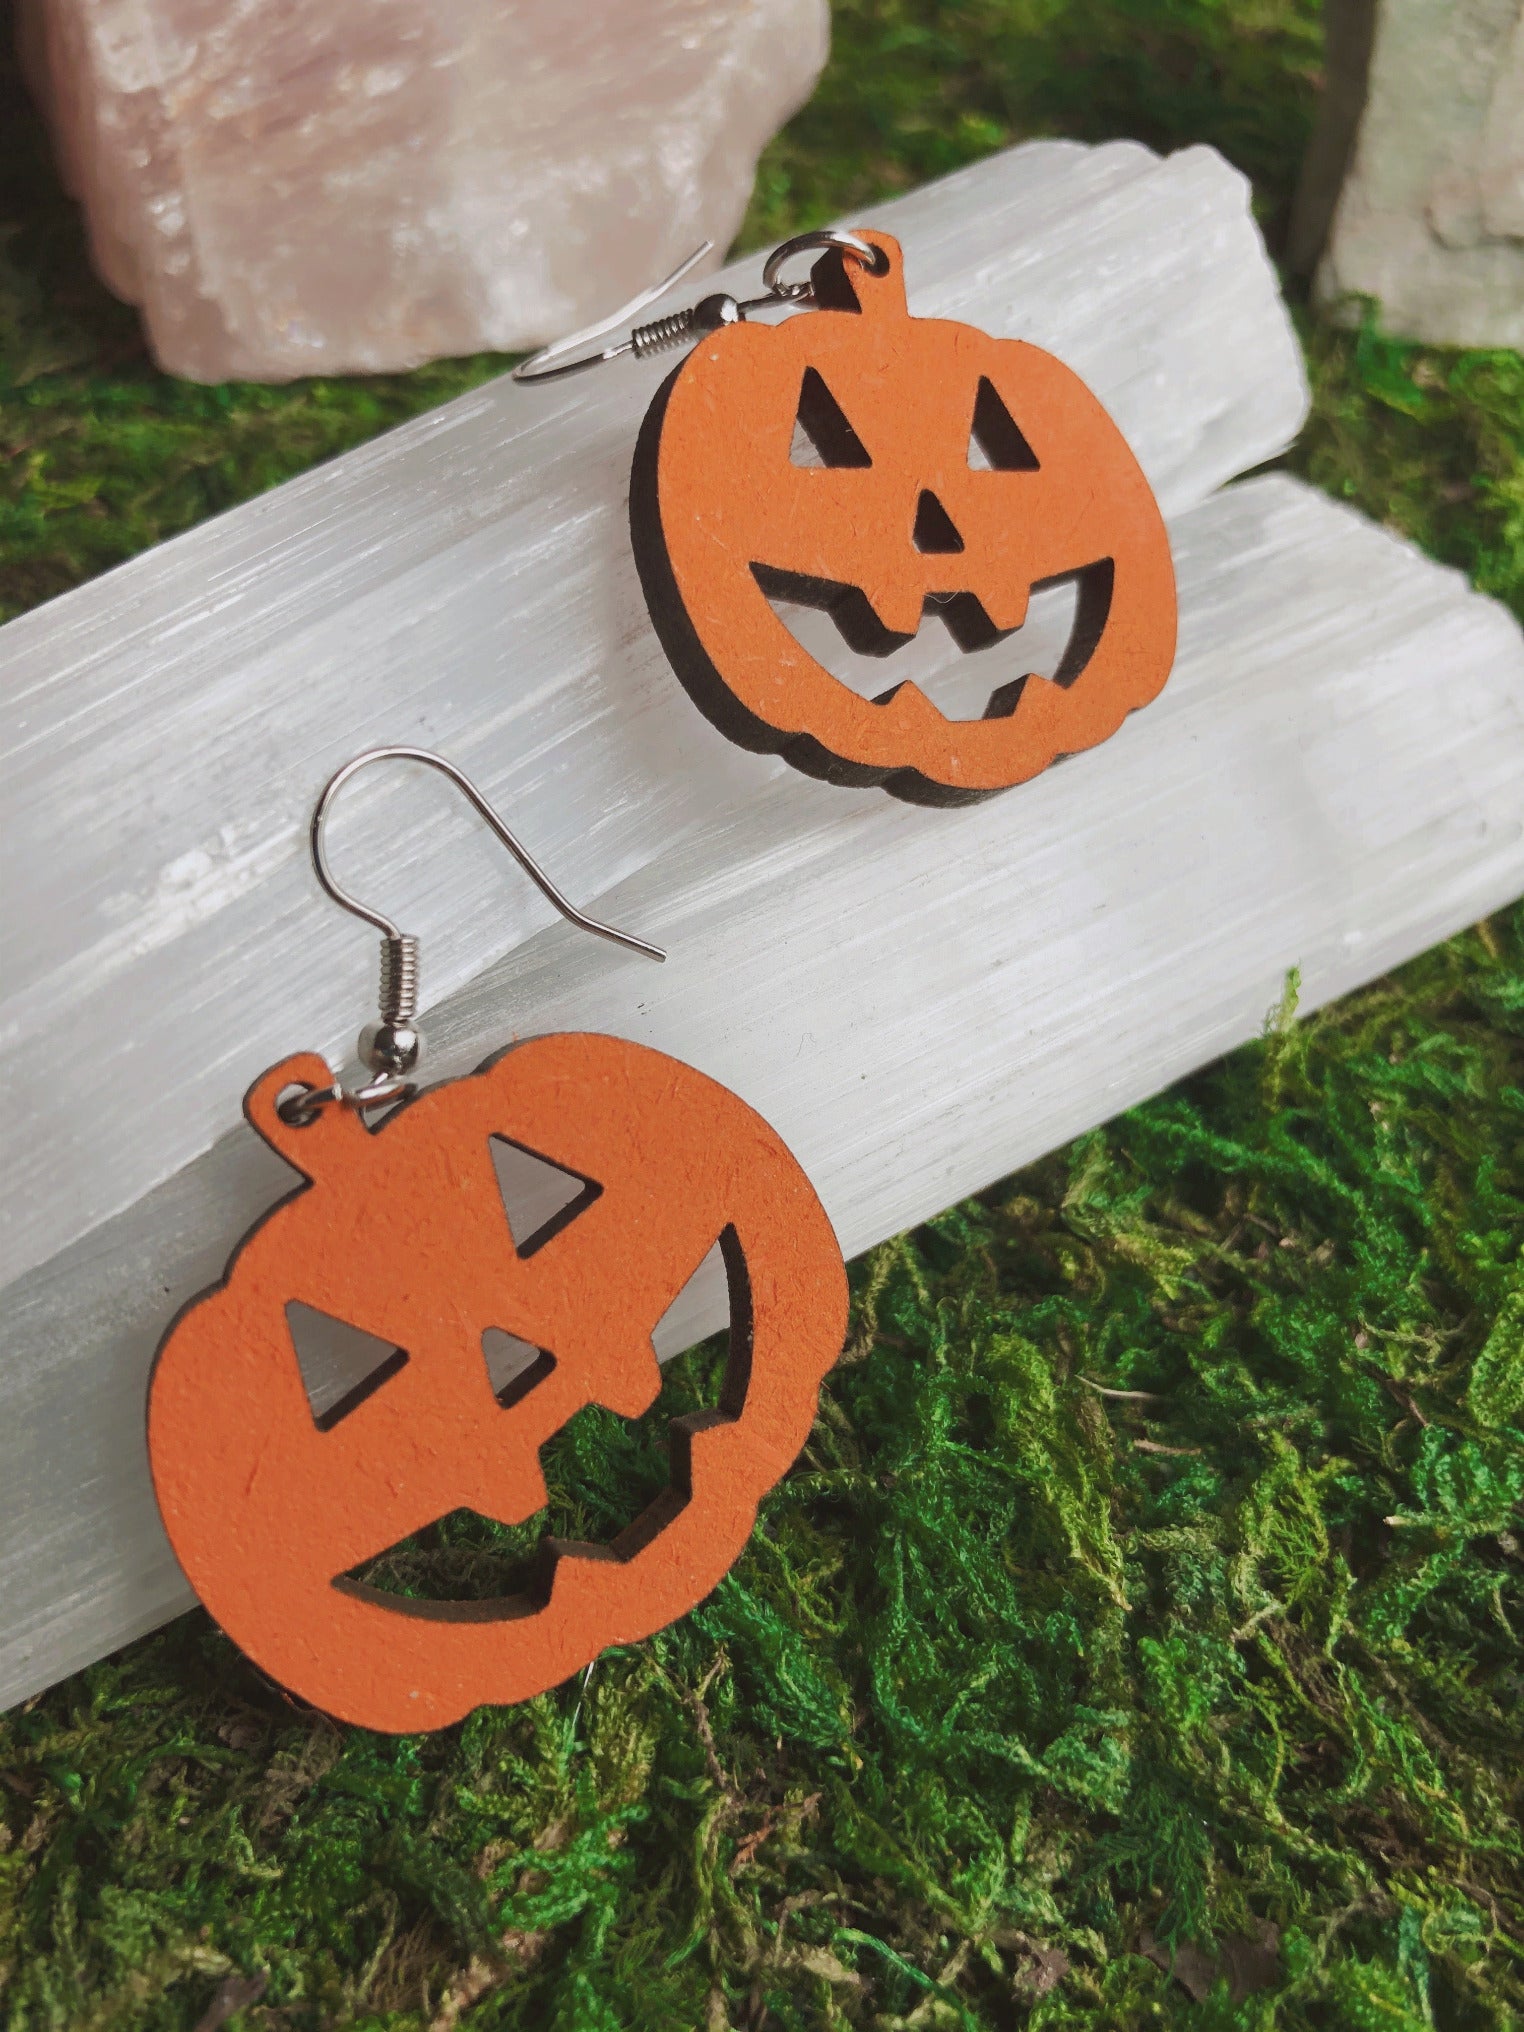 Pictured is a pair of earrings featuring orange pumpkins / jack-o-lanterns. They are made of wood. 